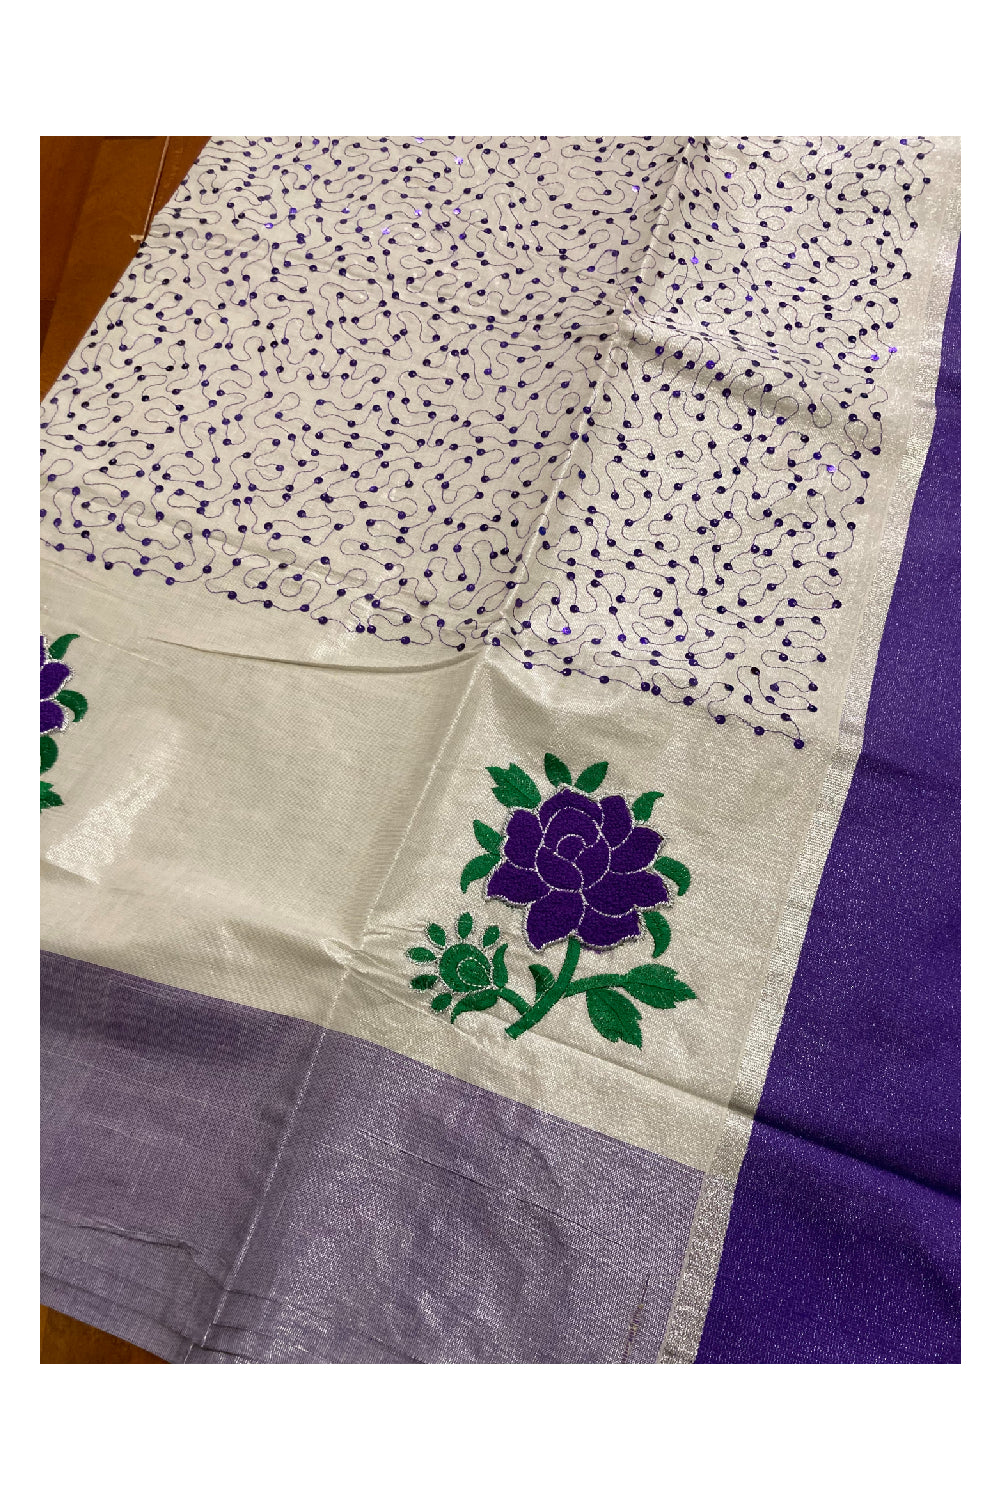 Silver Tissue Kasavu Saree with Violet Floral and Sequins Decorative Work